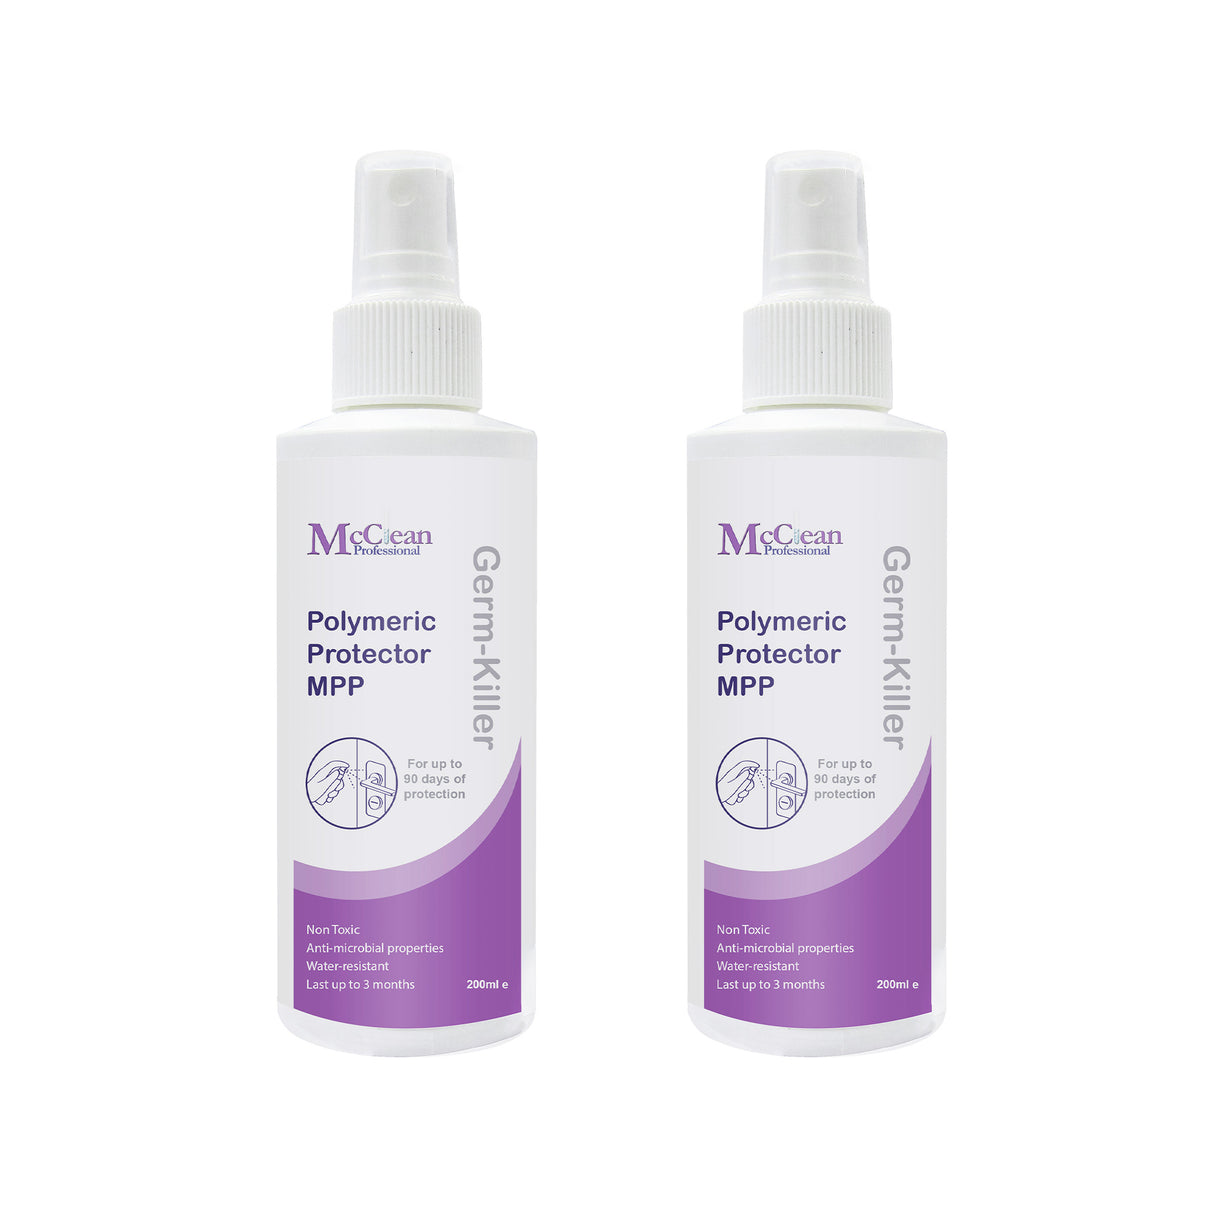 McClean® Polymeric Protector Antimicrobial Self-Disinfecting Coating Spray – Fragrance-free